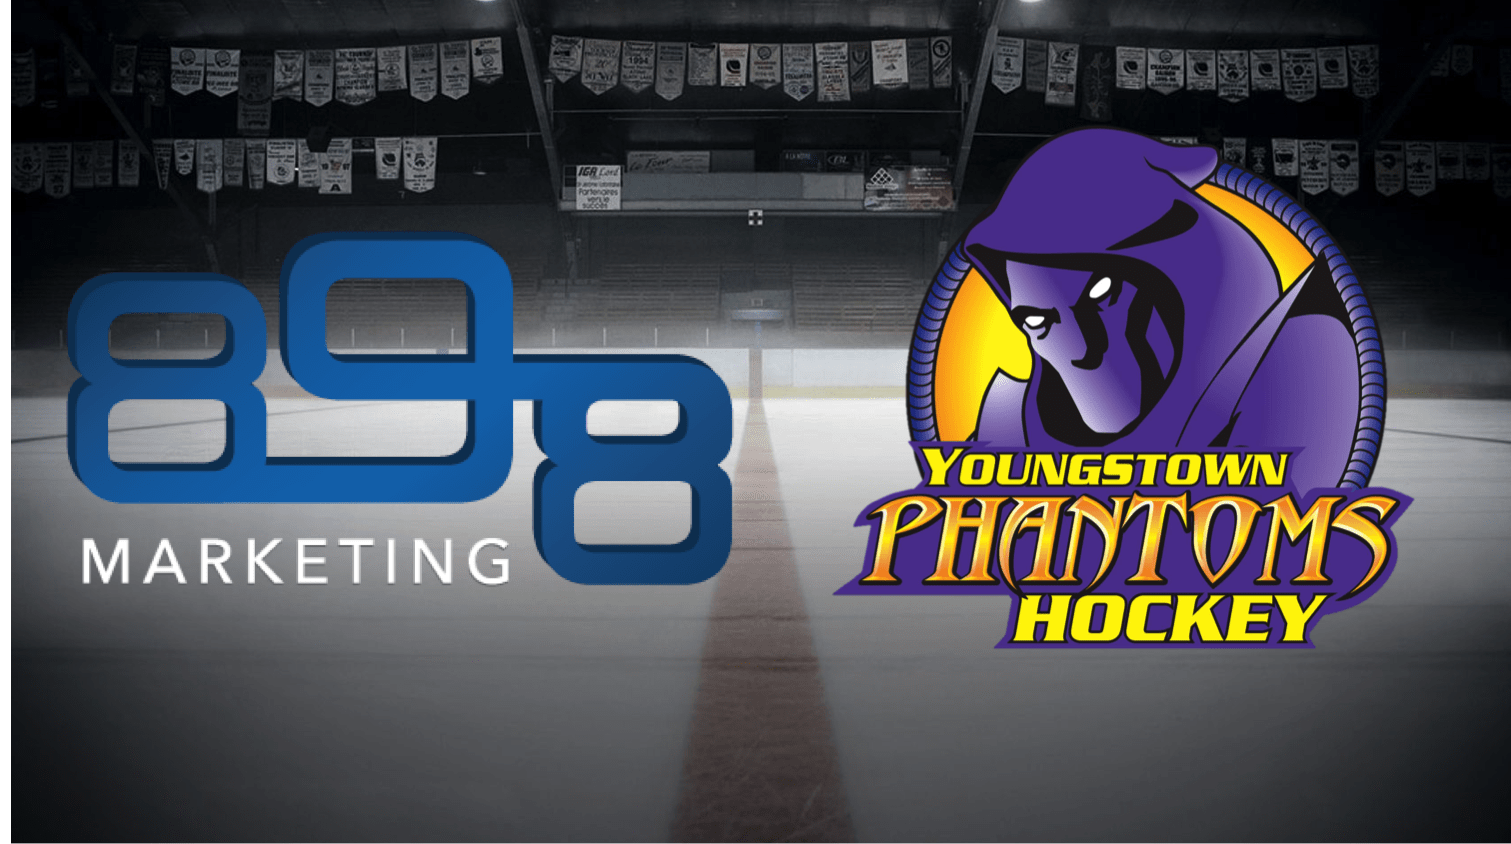 898 Marketing and Youngstown Phantoms